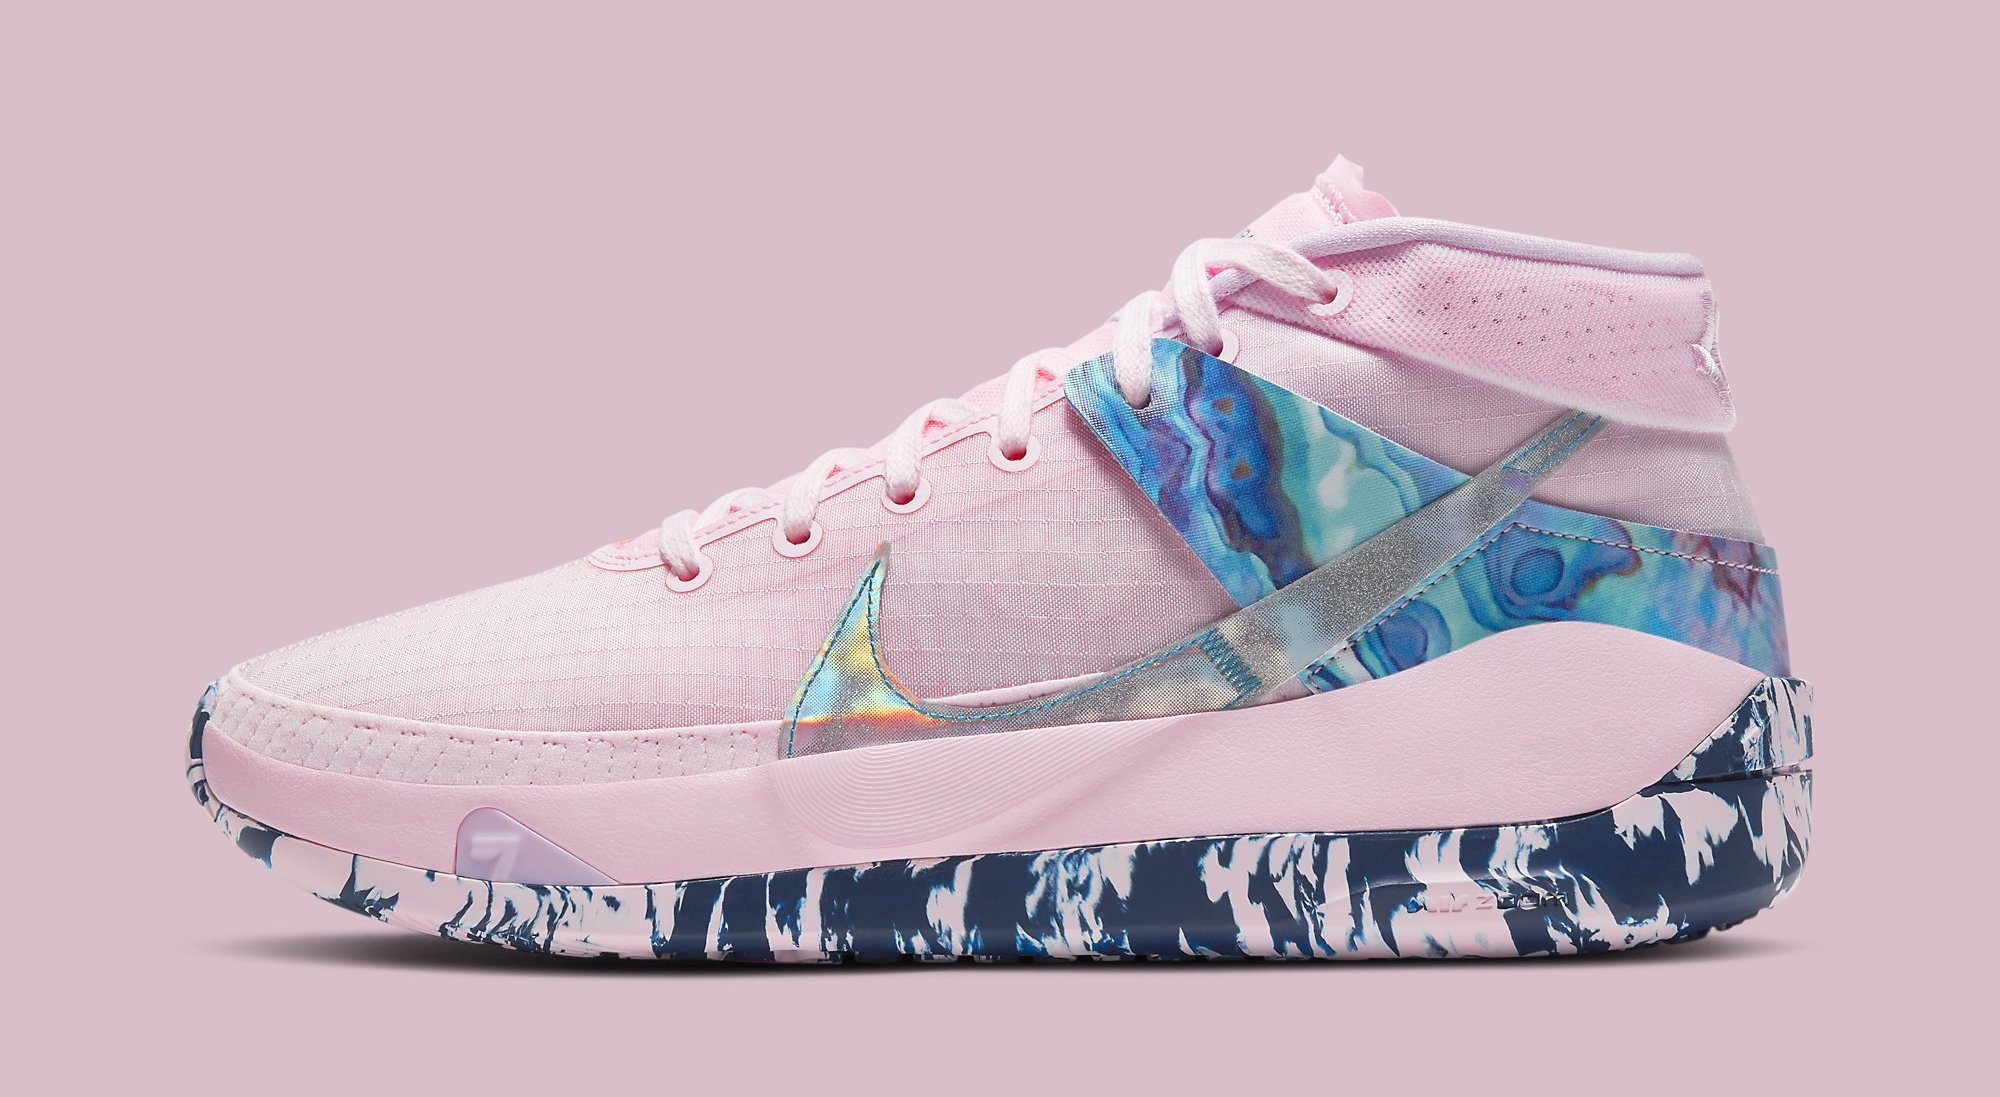 Nike KD 13 &#x27;Aunt Pearl&#x27; DC0011 600 Lateral